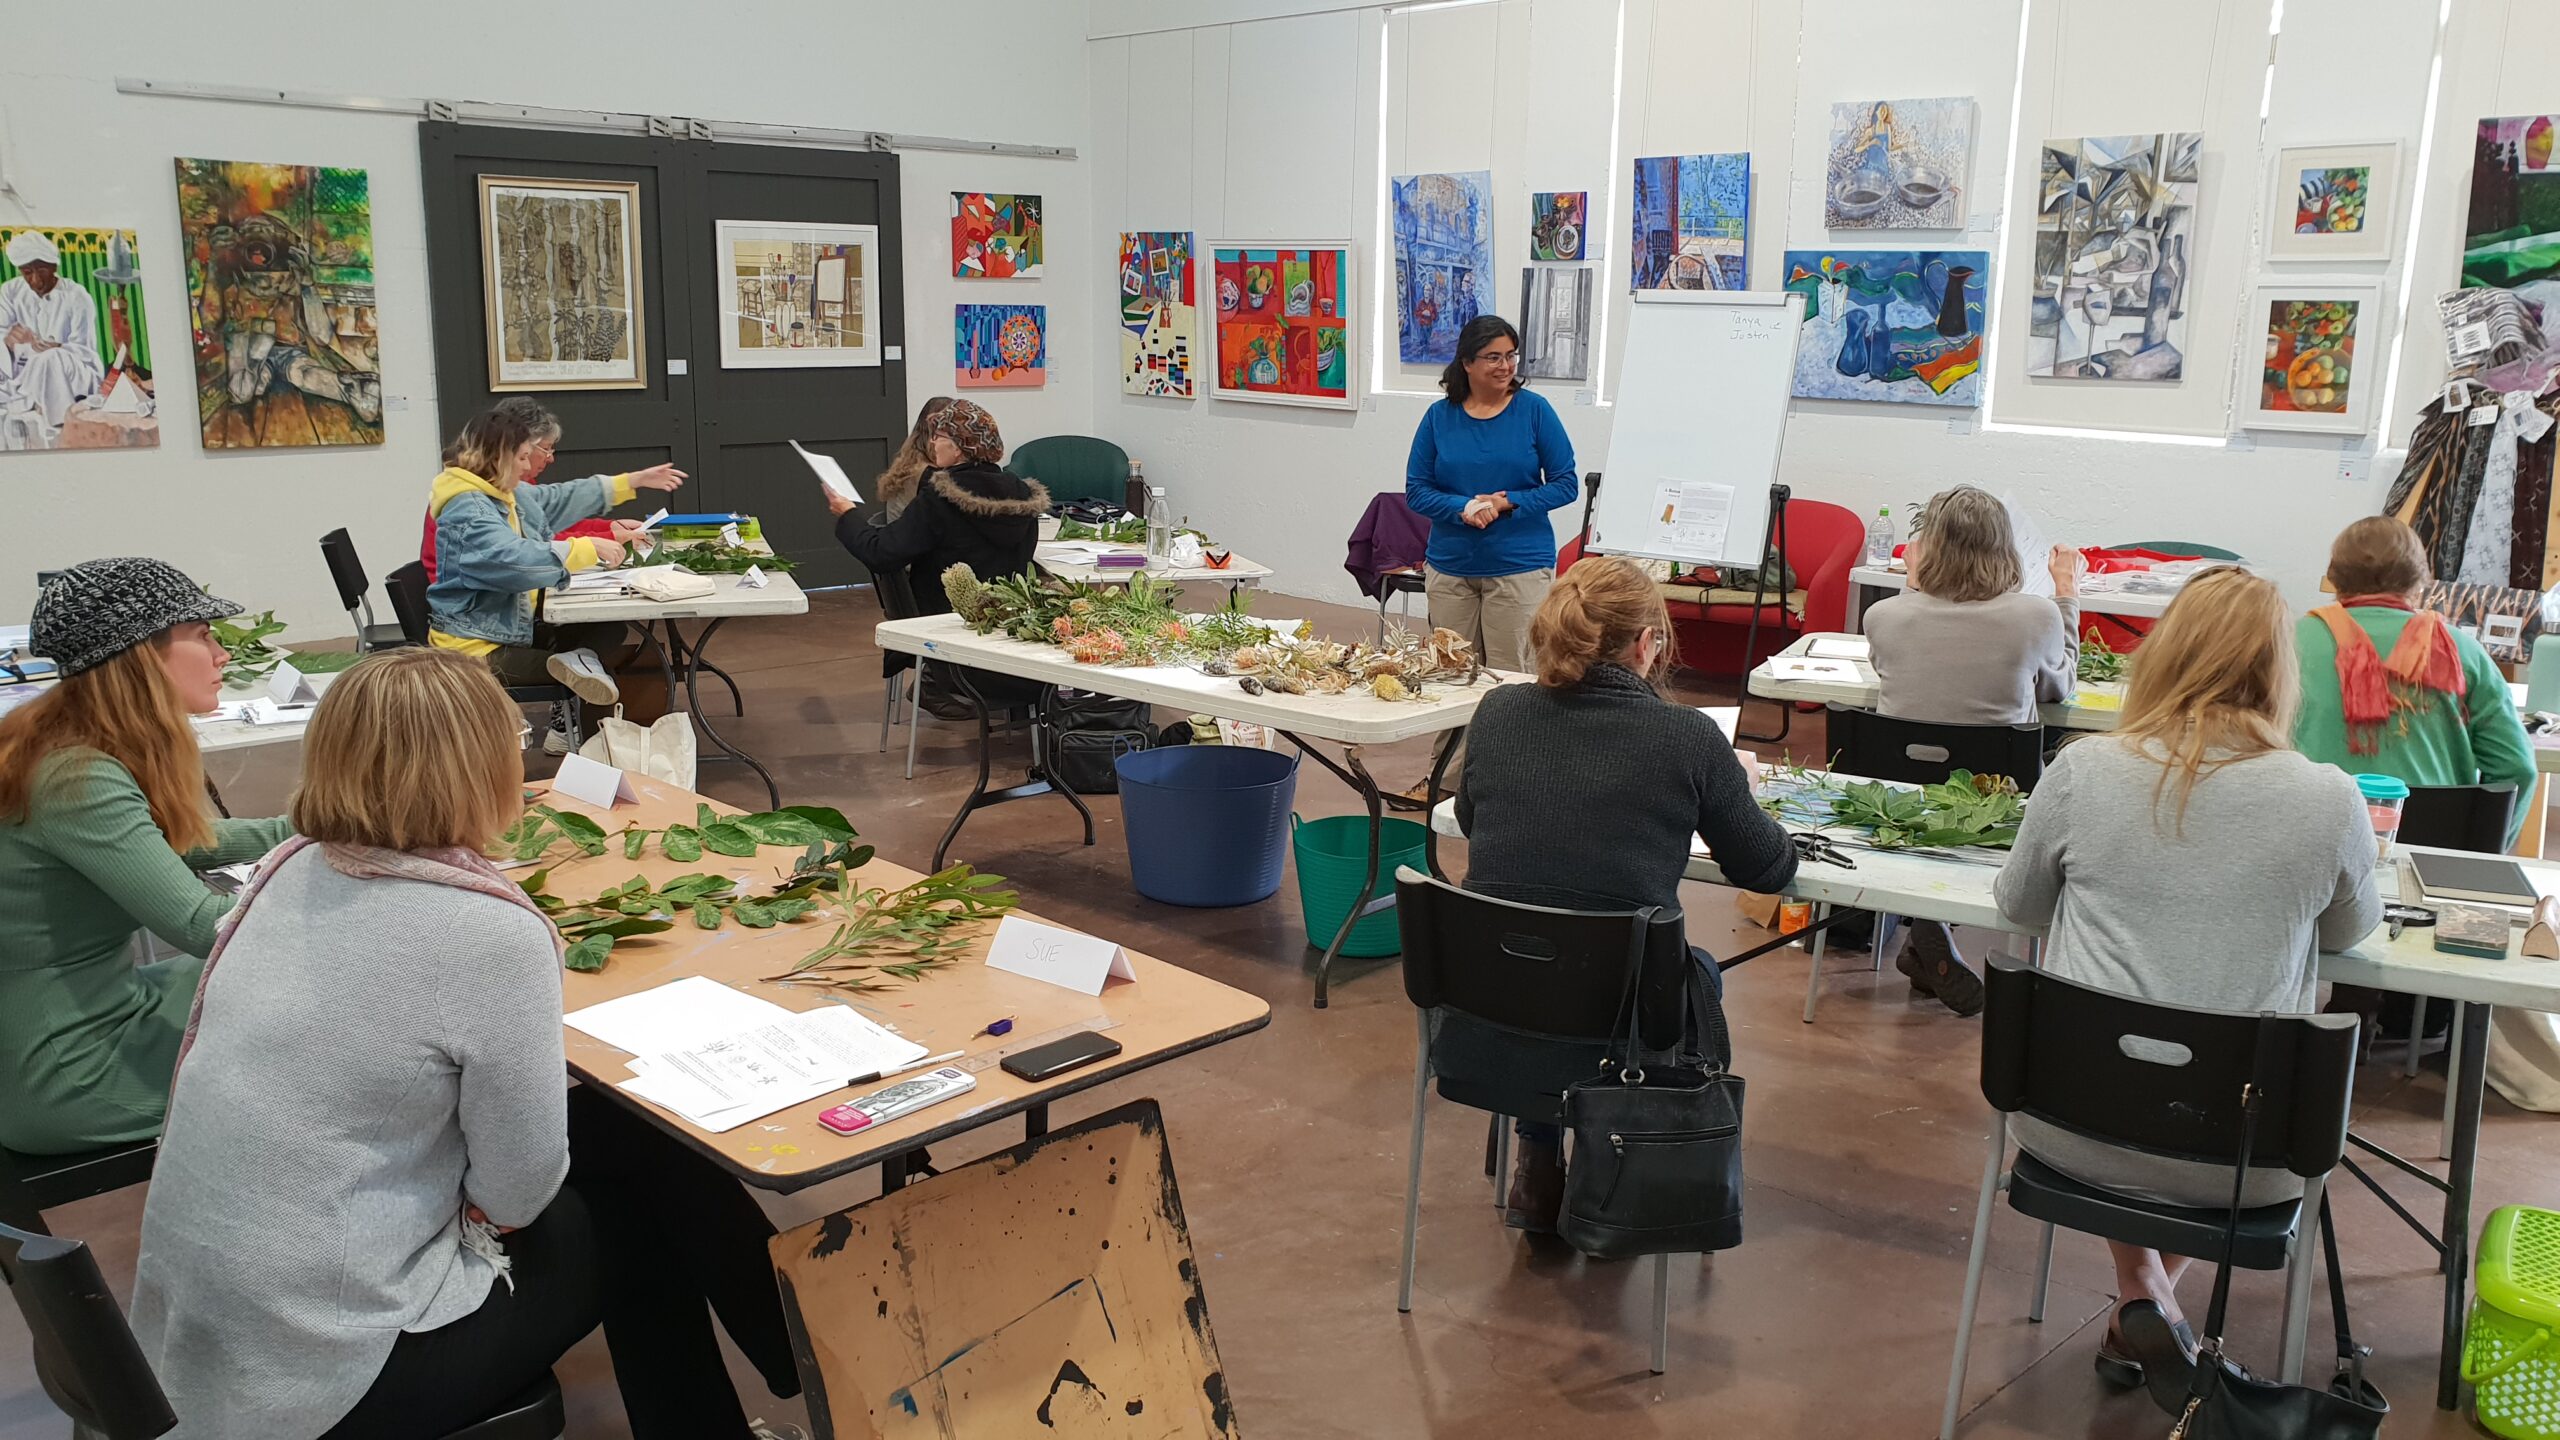 Image of a class environment by Tanya Scharaschkin in her Artist Profile with Art Trails Tasmania